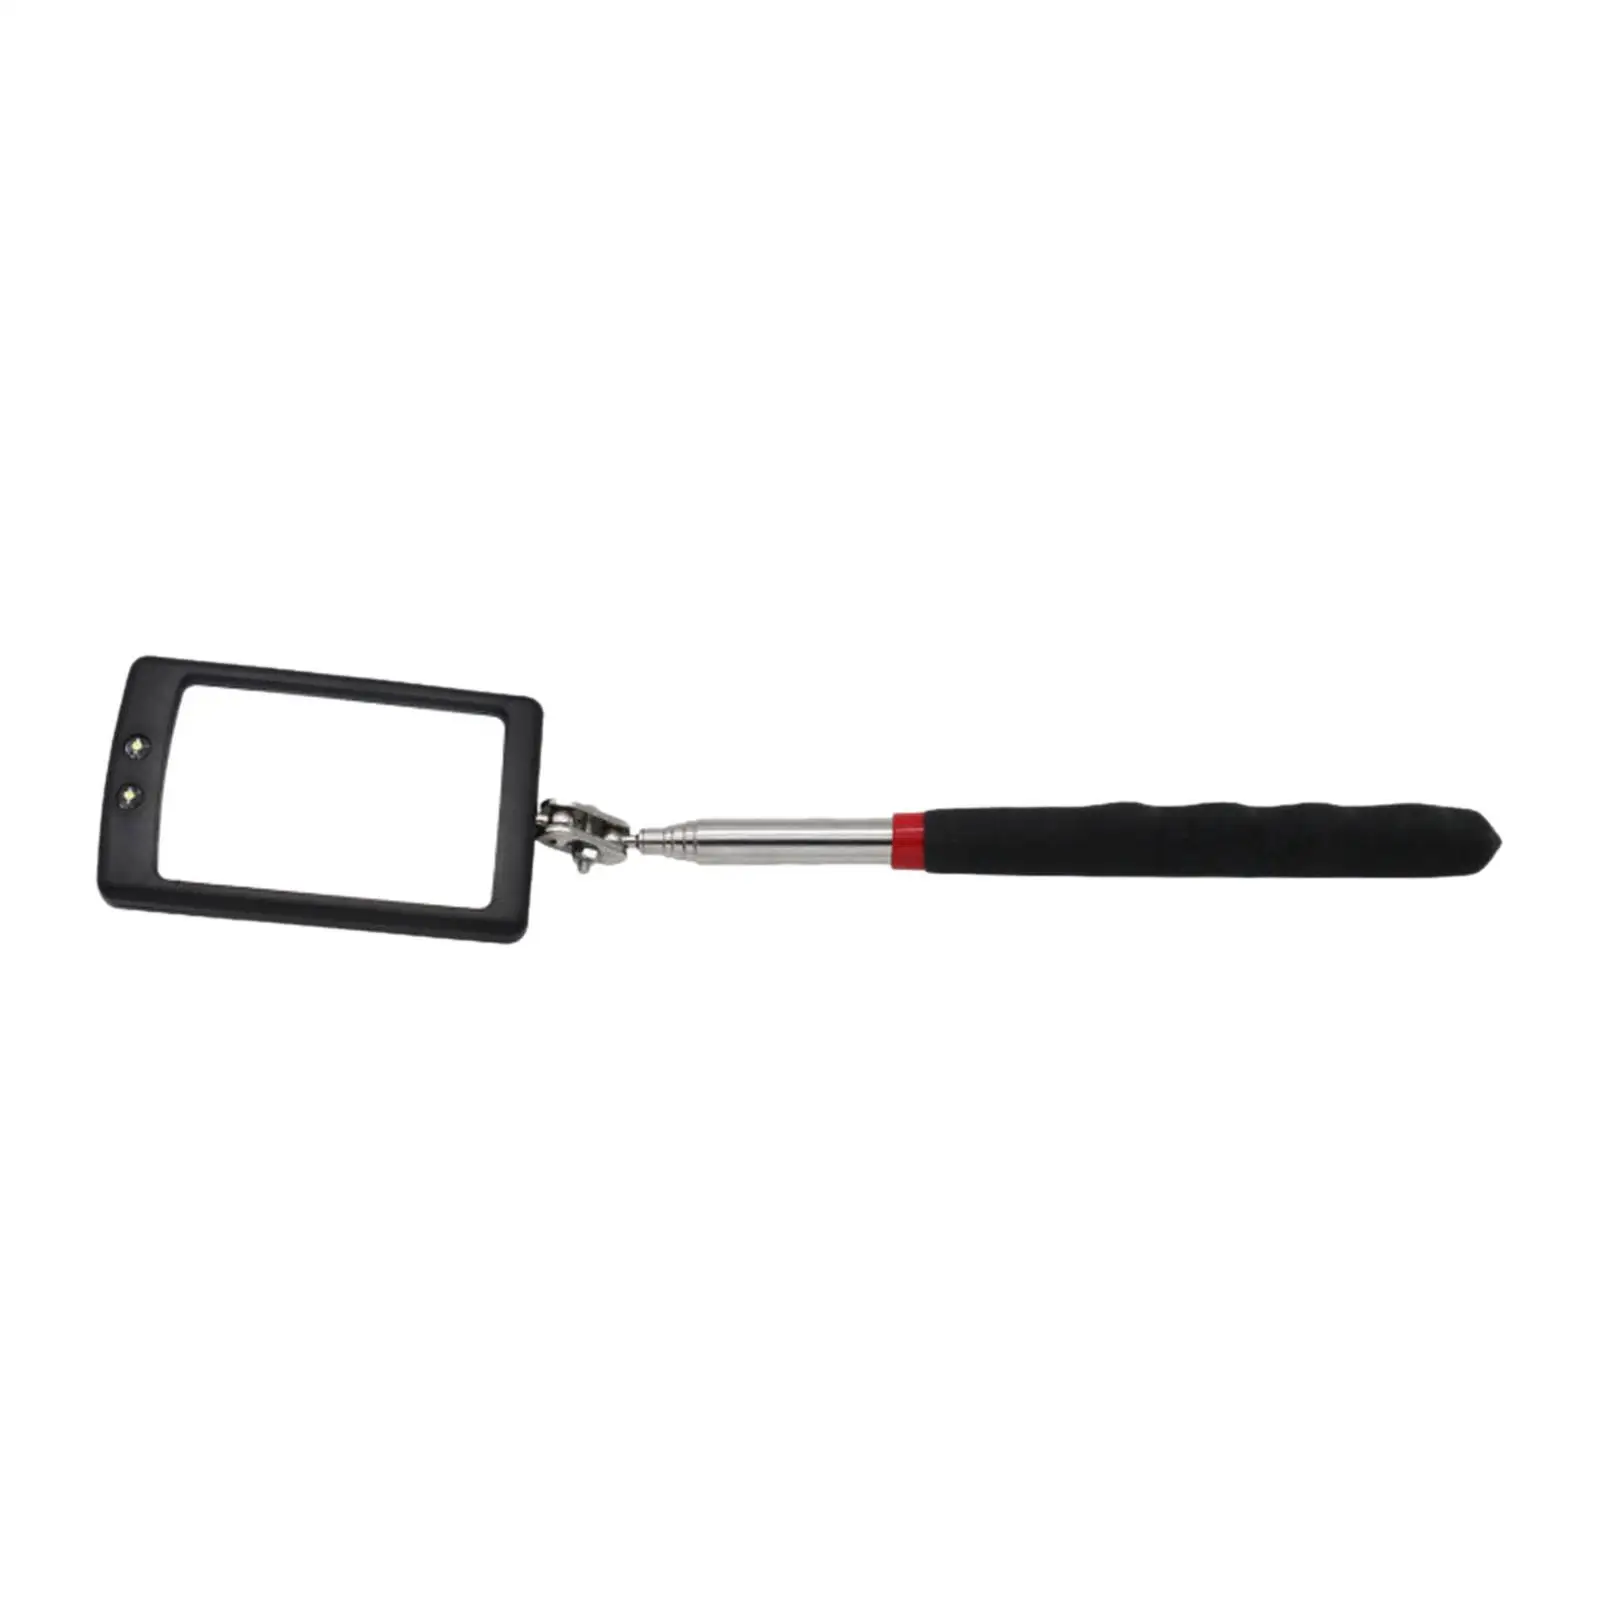 Telescopic Inspection Mirror Pick up Tool with LED for Home Inspector Small Parts Observation Eyelashes Car Repair